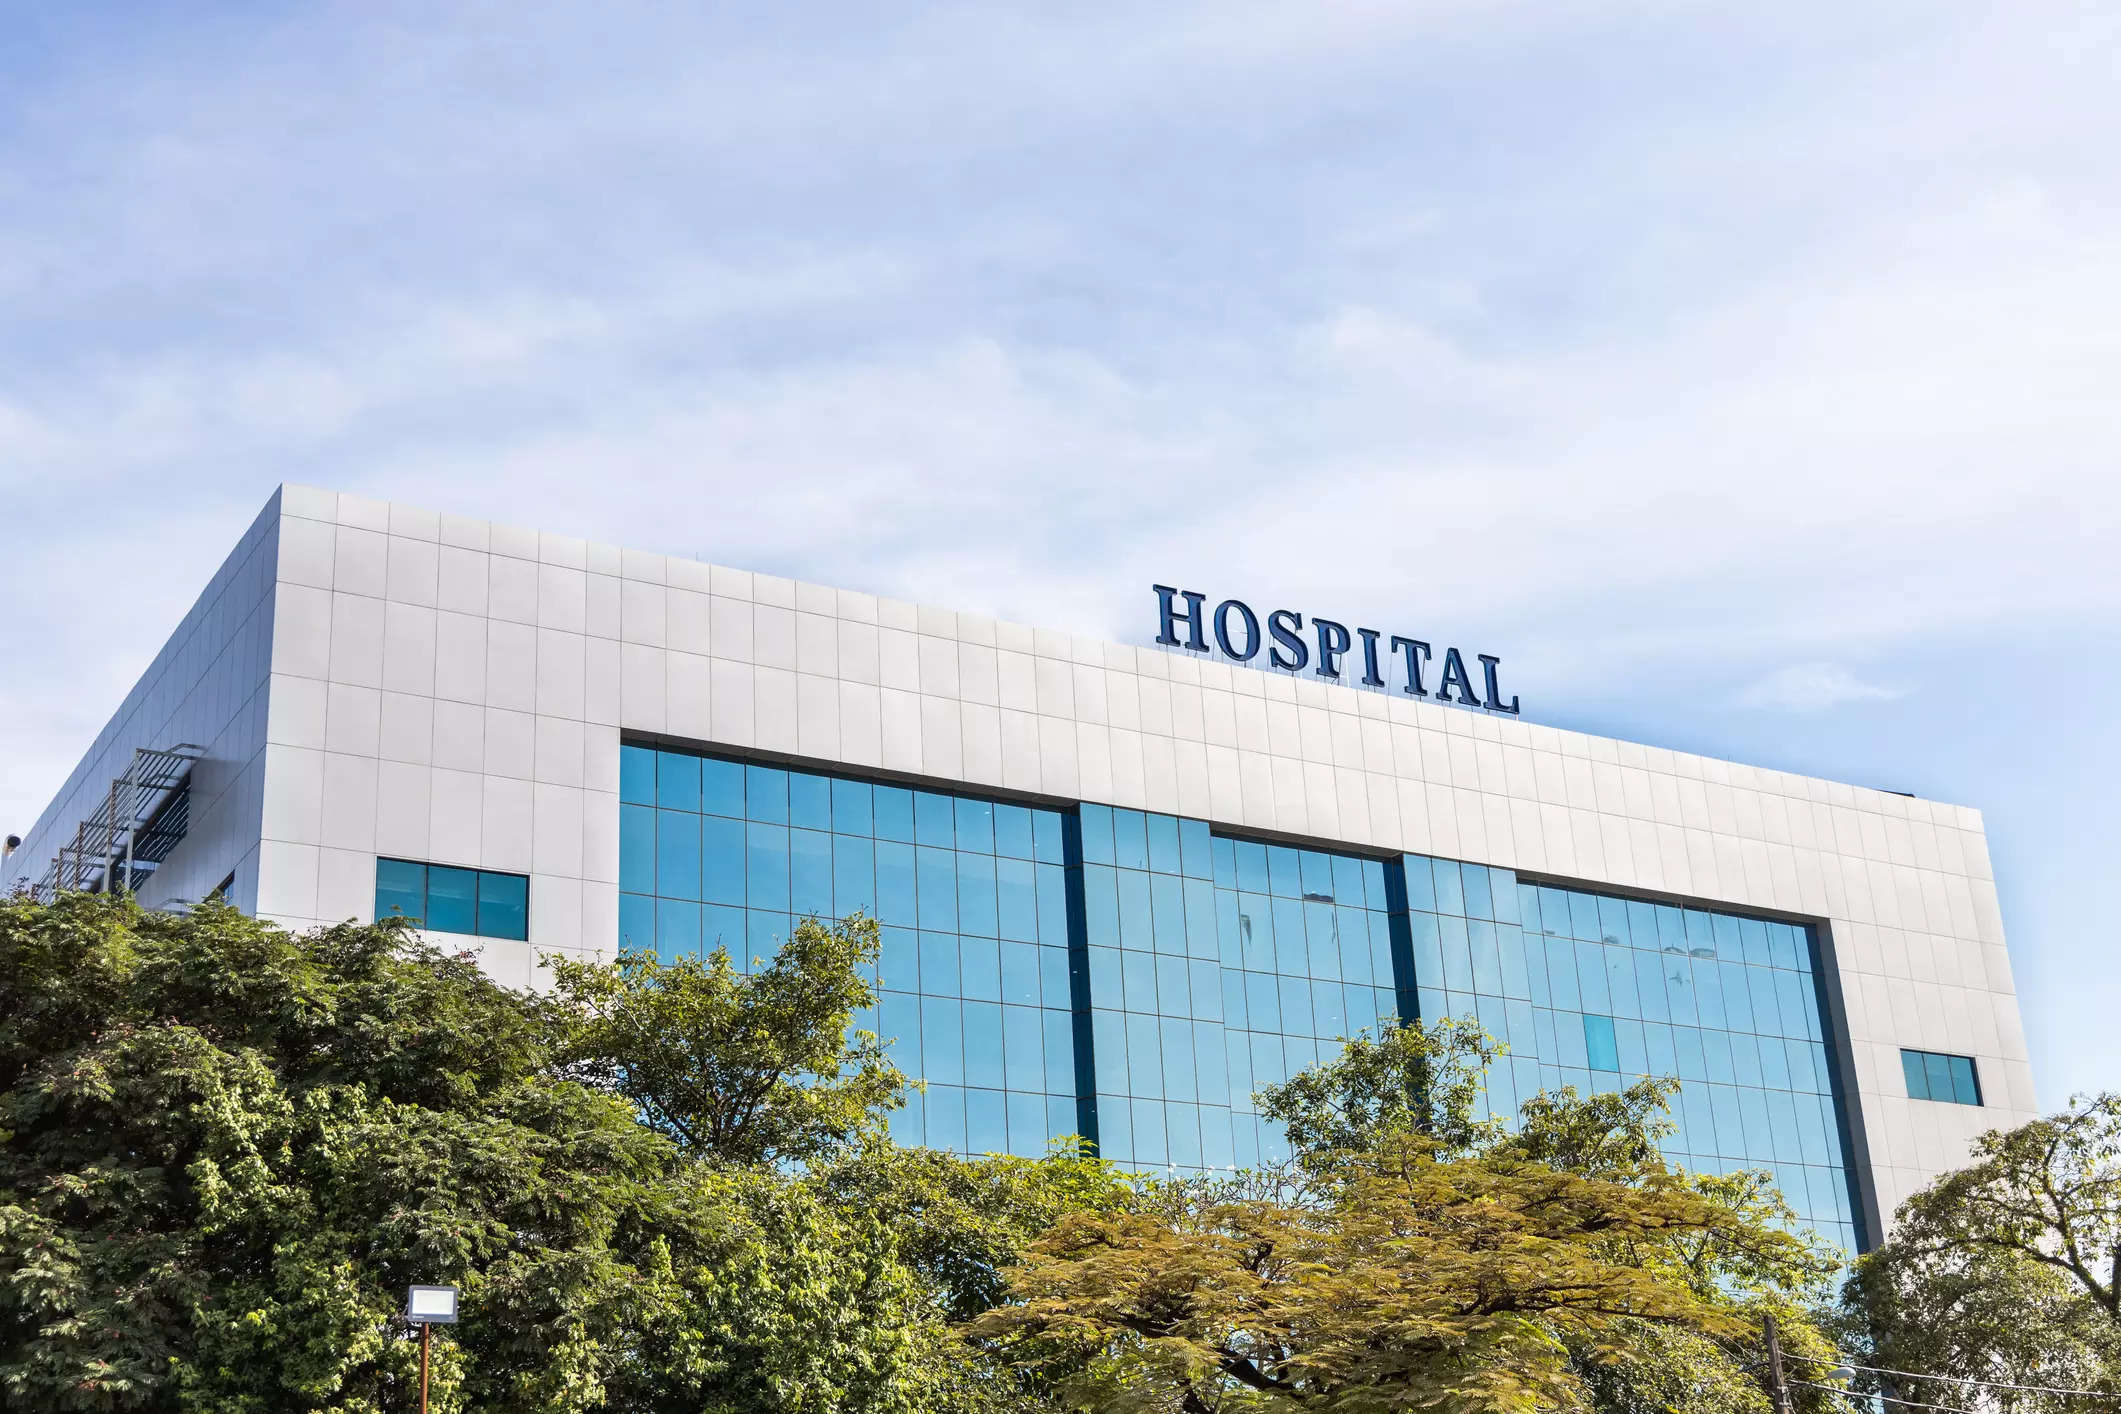 Manipal Hospitals scouts for aggressive growth: MD 